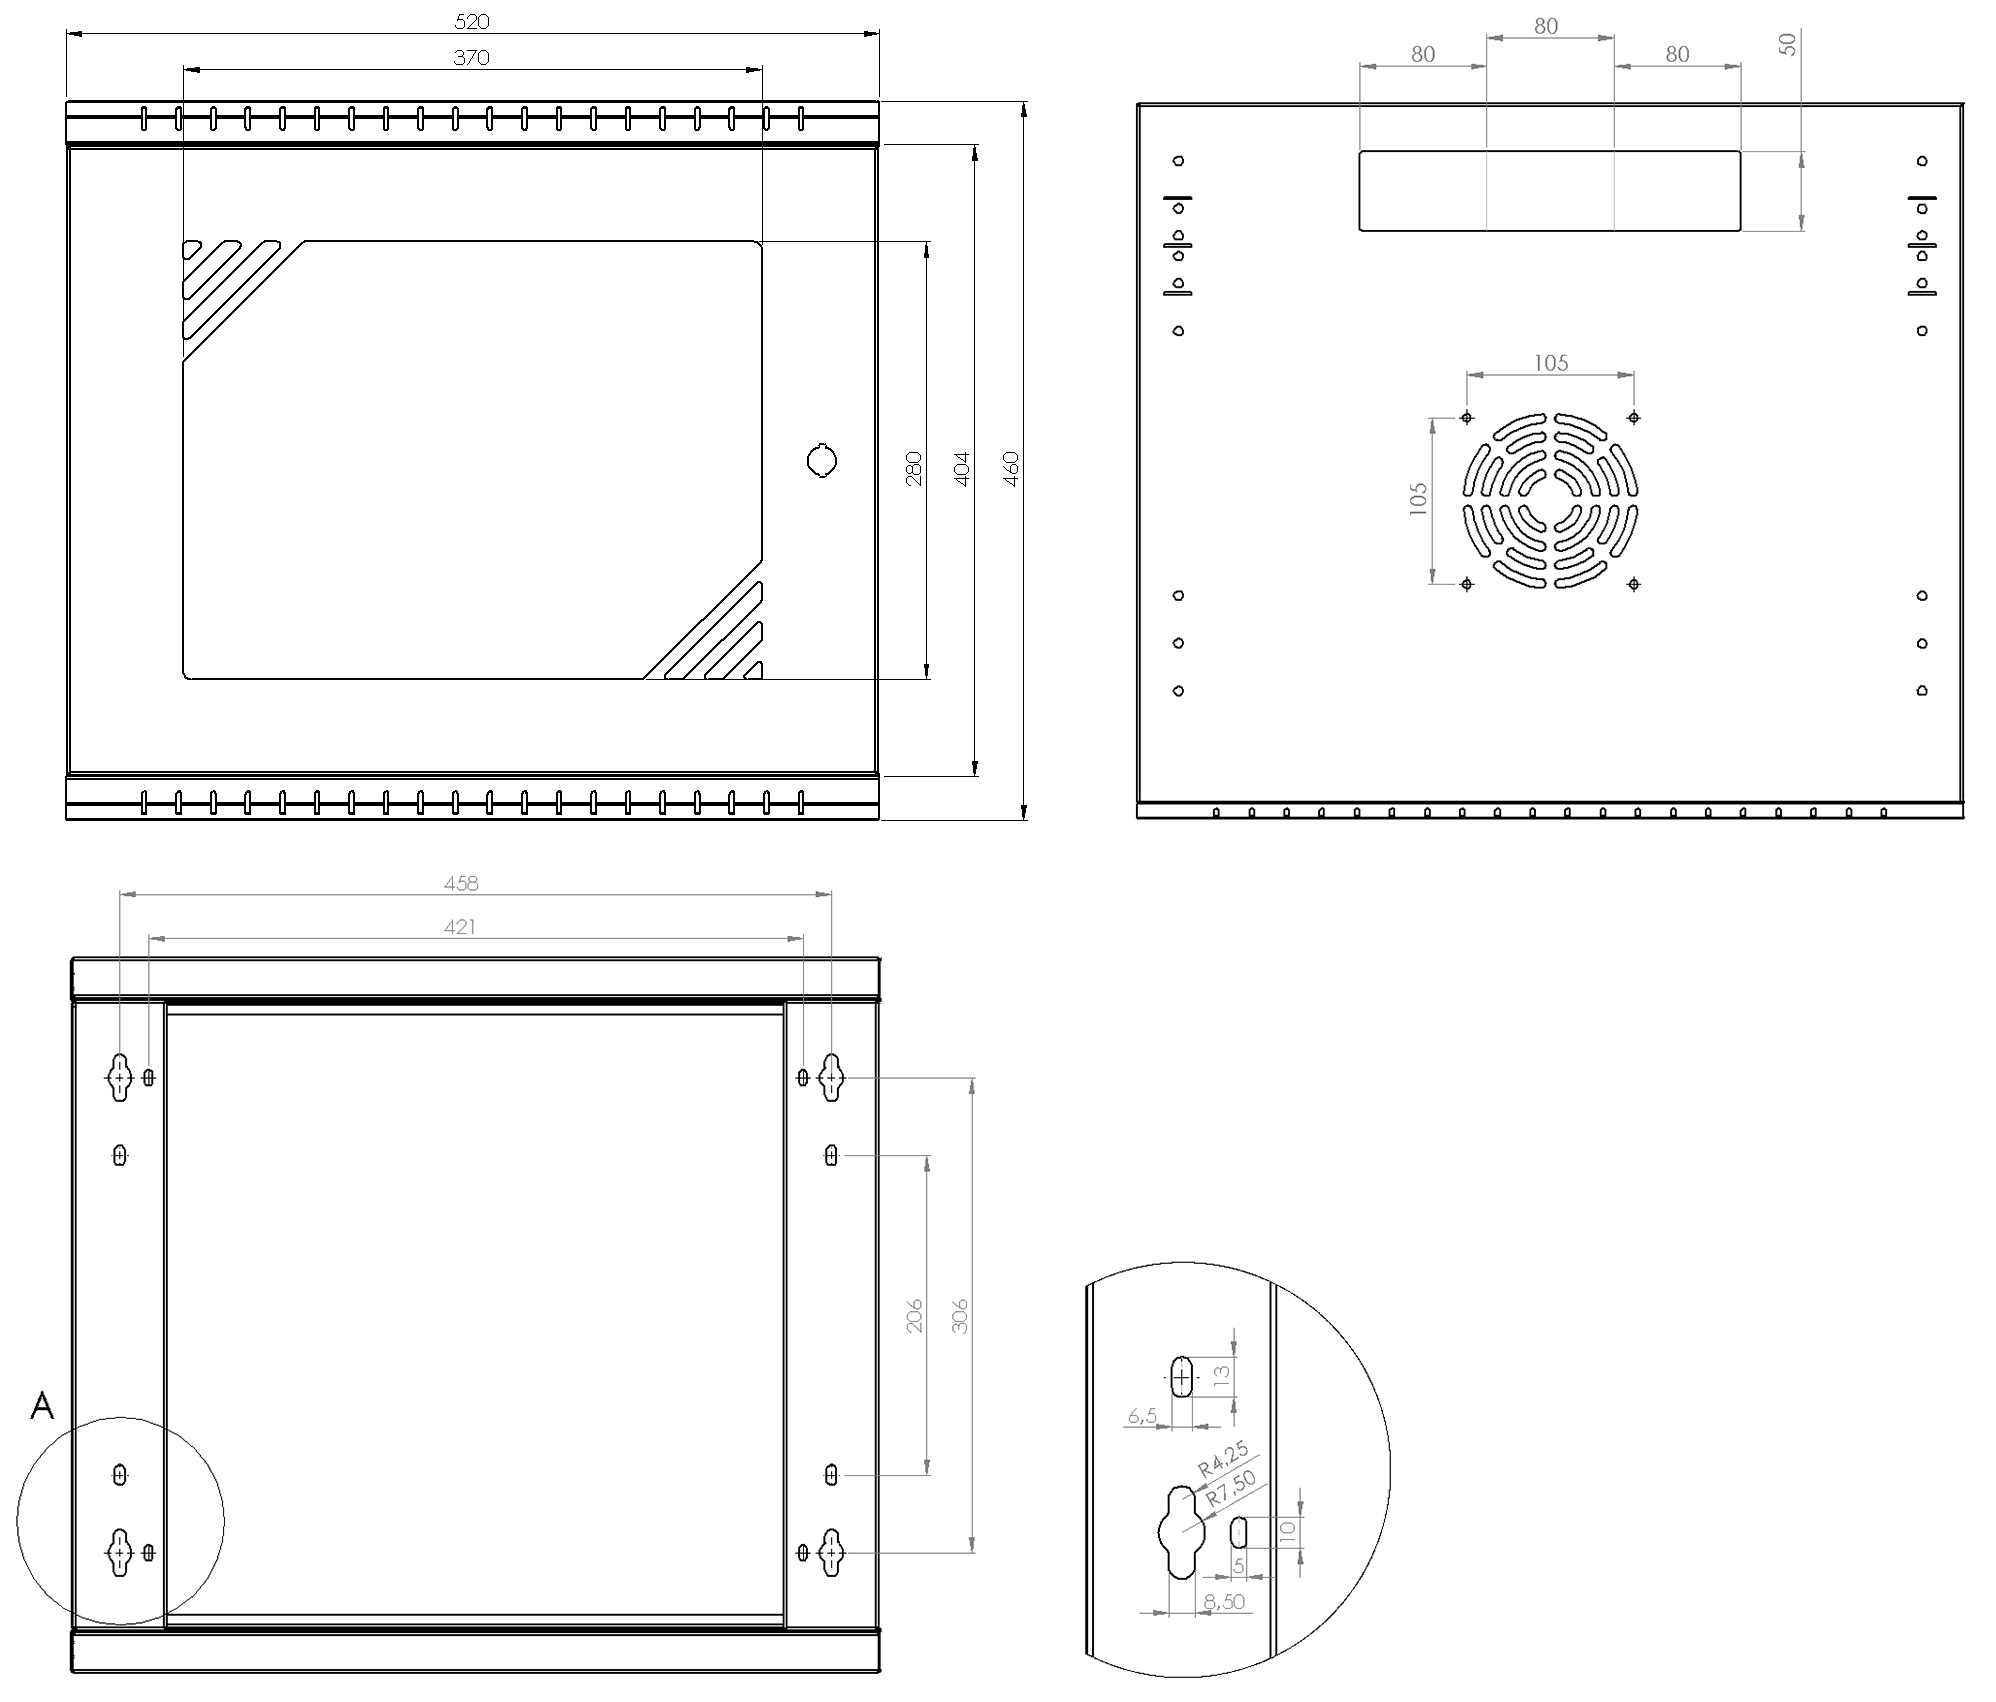  Technical drawing for 19" 9U 450mm server cabinet, door with glass. Front, top, rear.